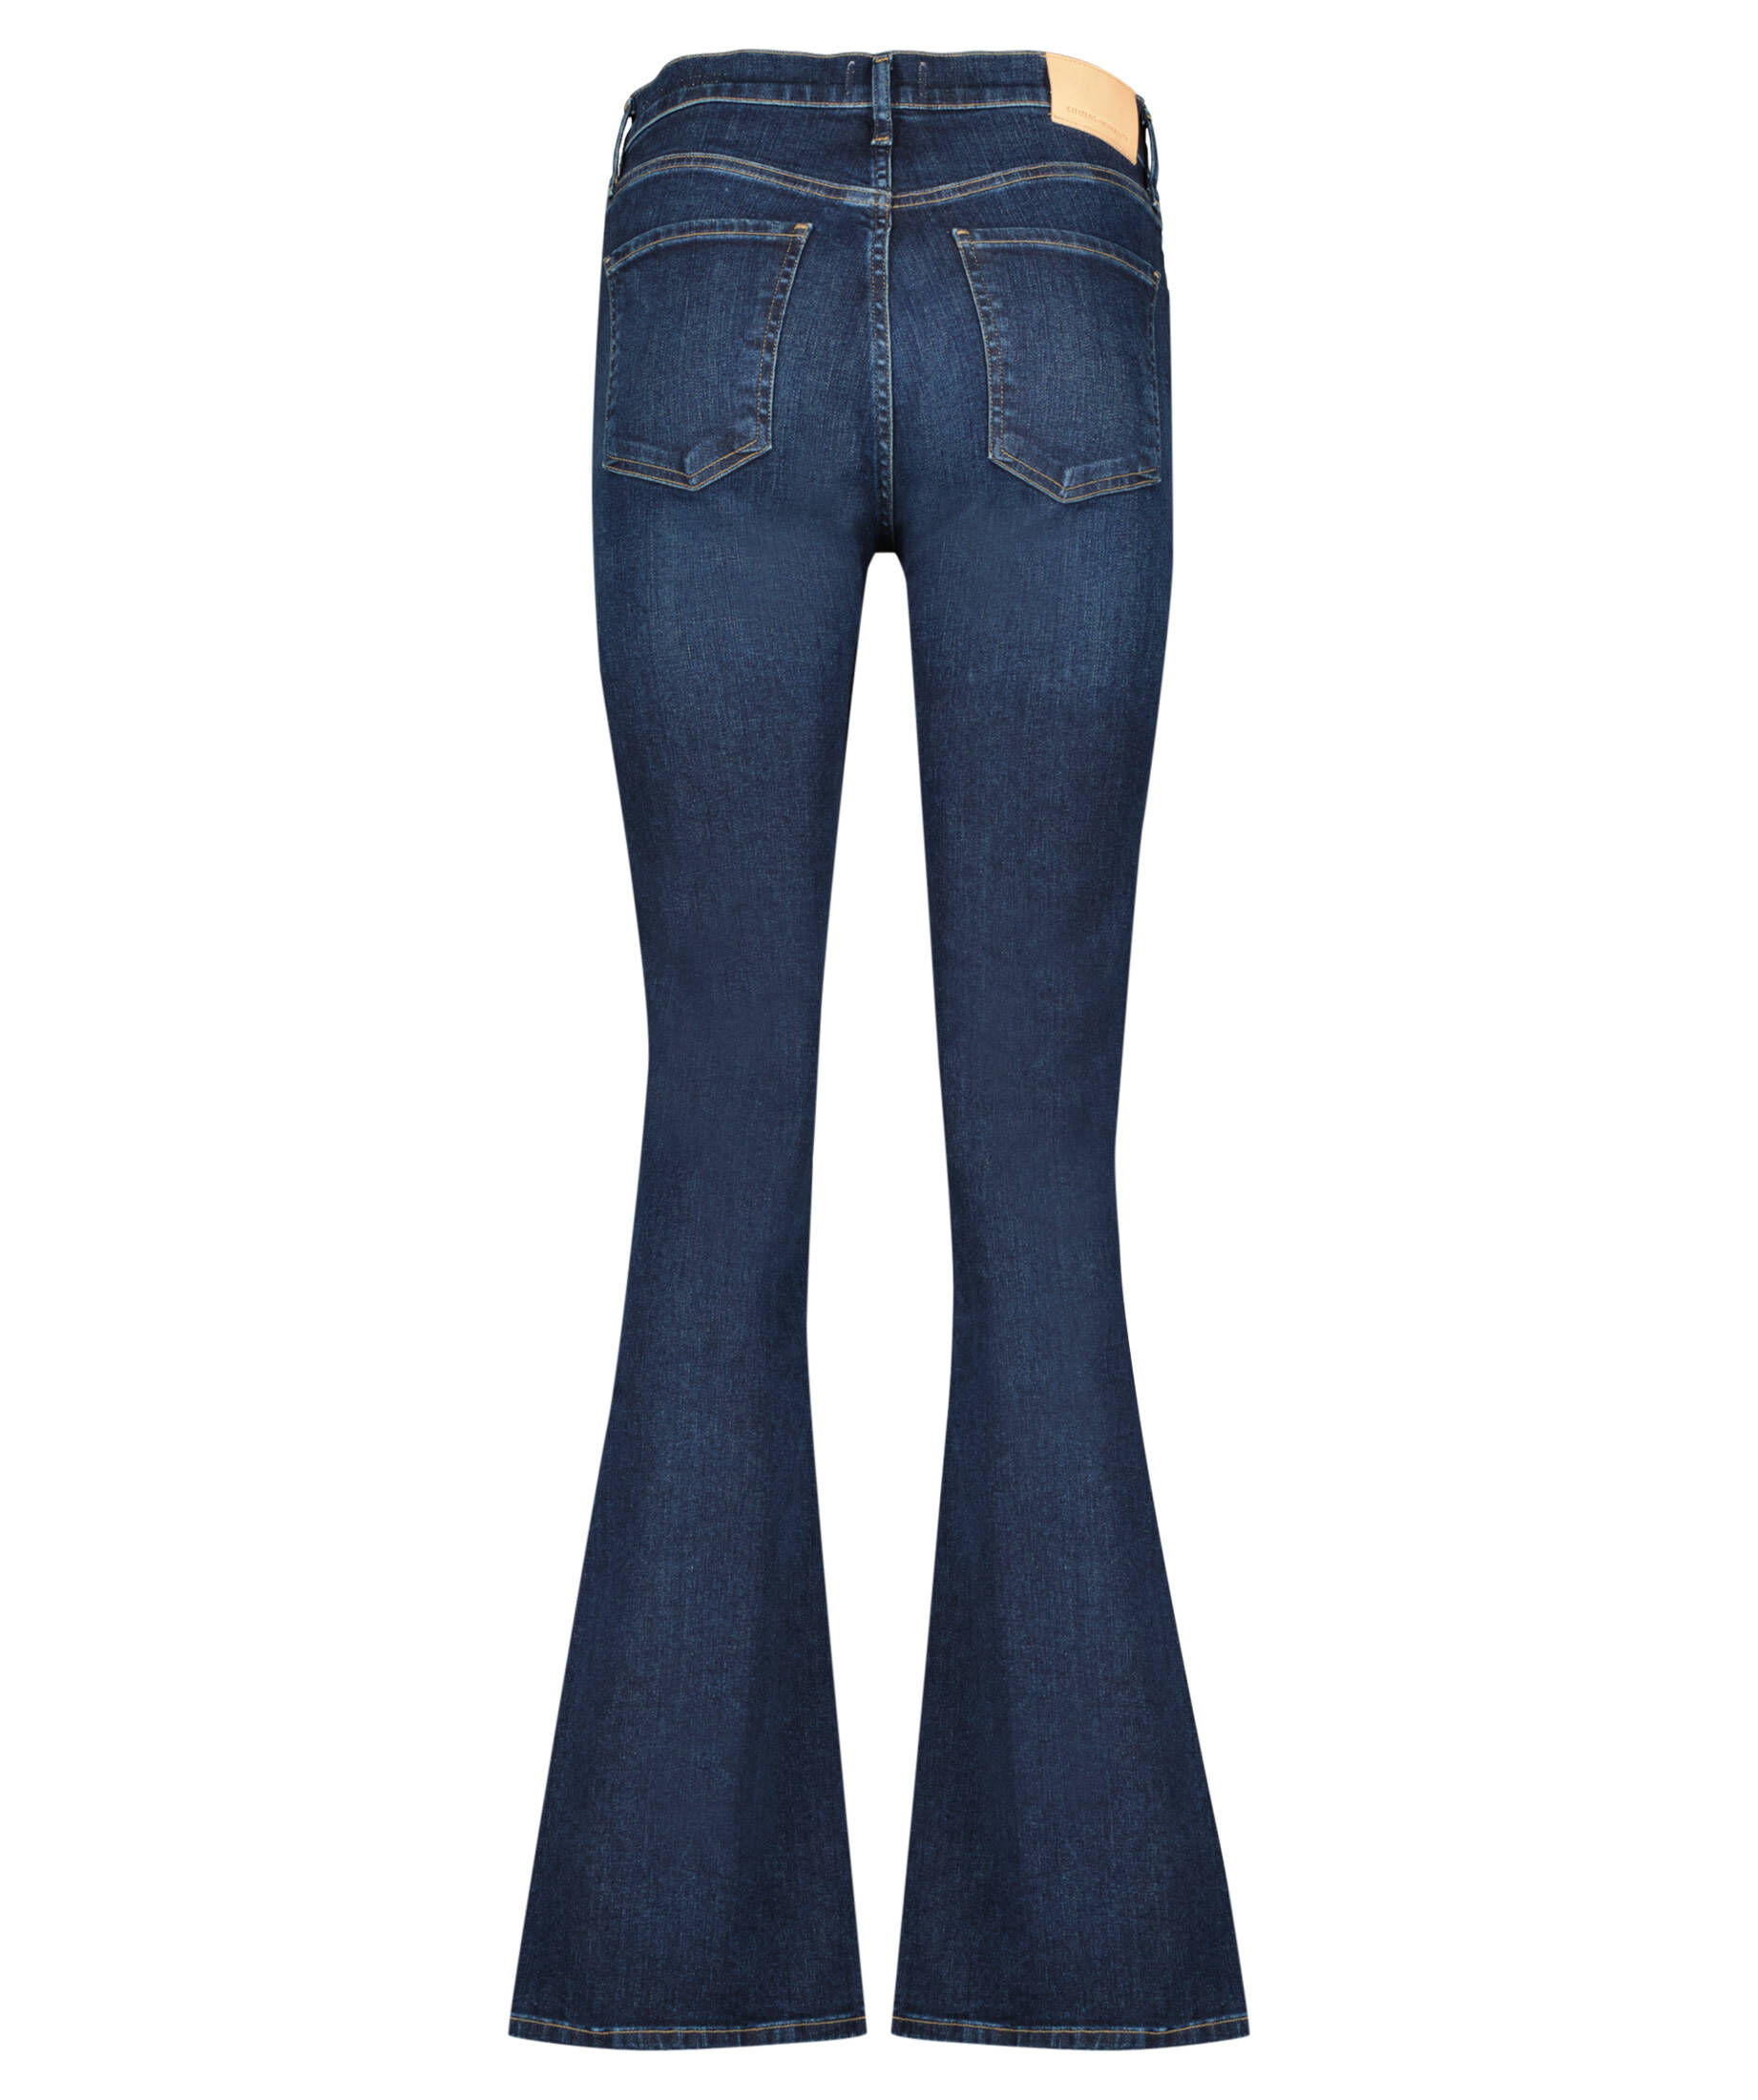 Damen Bekleidung Jeans Bootcut Jeans Citizens of Humanity Denim High-Rise Bootcut Jeans Lilah in Blau 